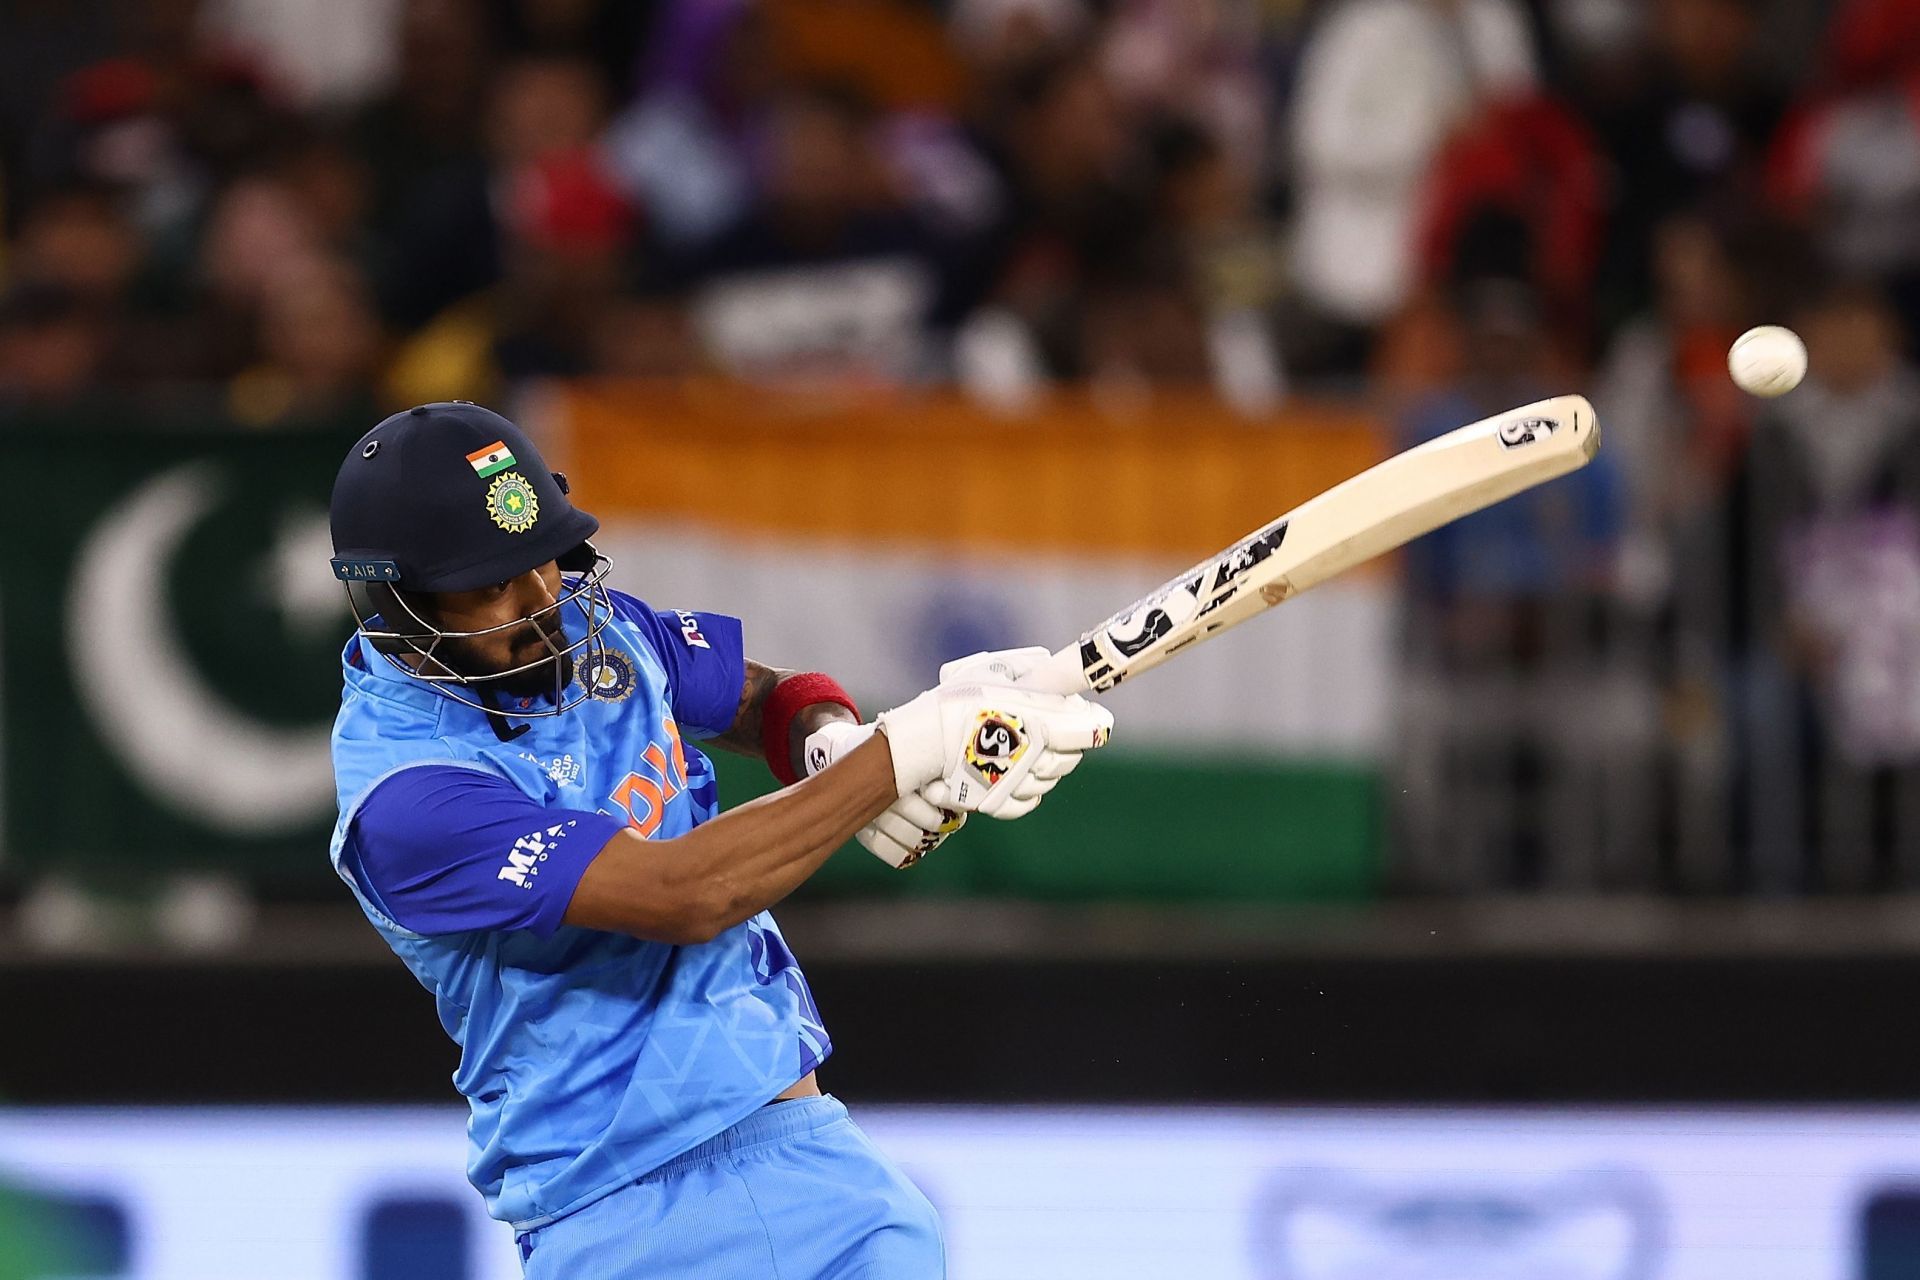 KL Rahul struck four sixes during his innings.